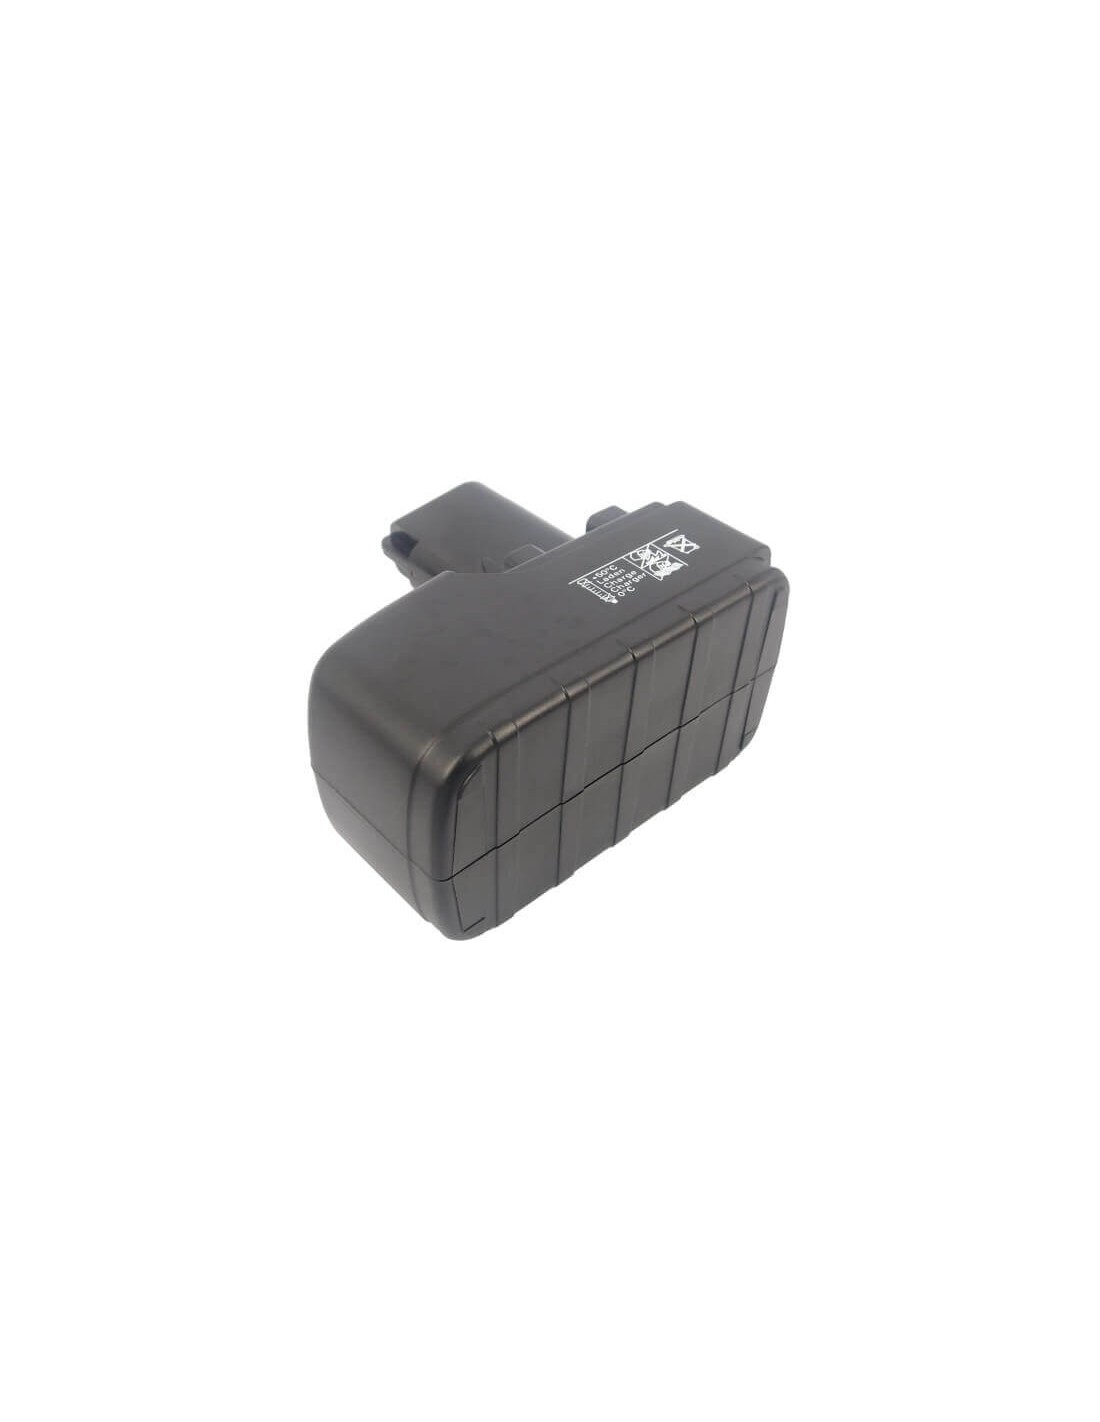 Battery for Metabo Bs 15.6 Plus, Bst 15.6, Bst 15.6 Plus 15.6V, 3300mAh - 51.48Wh